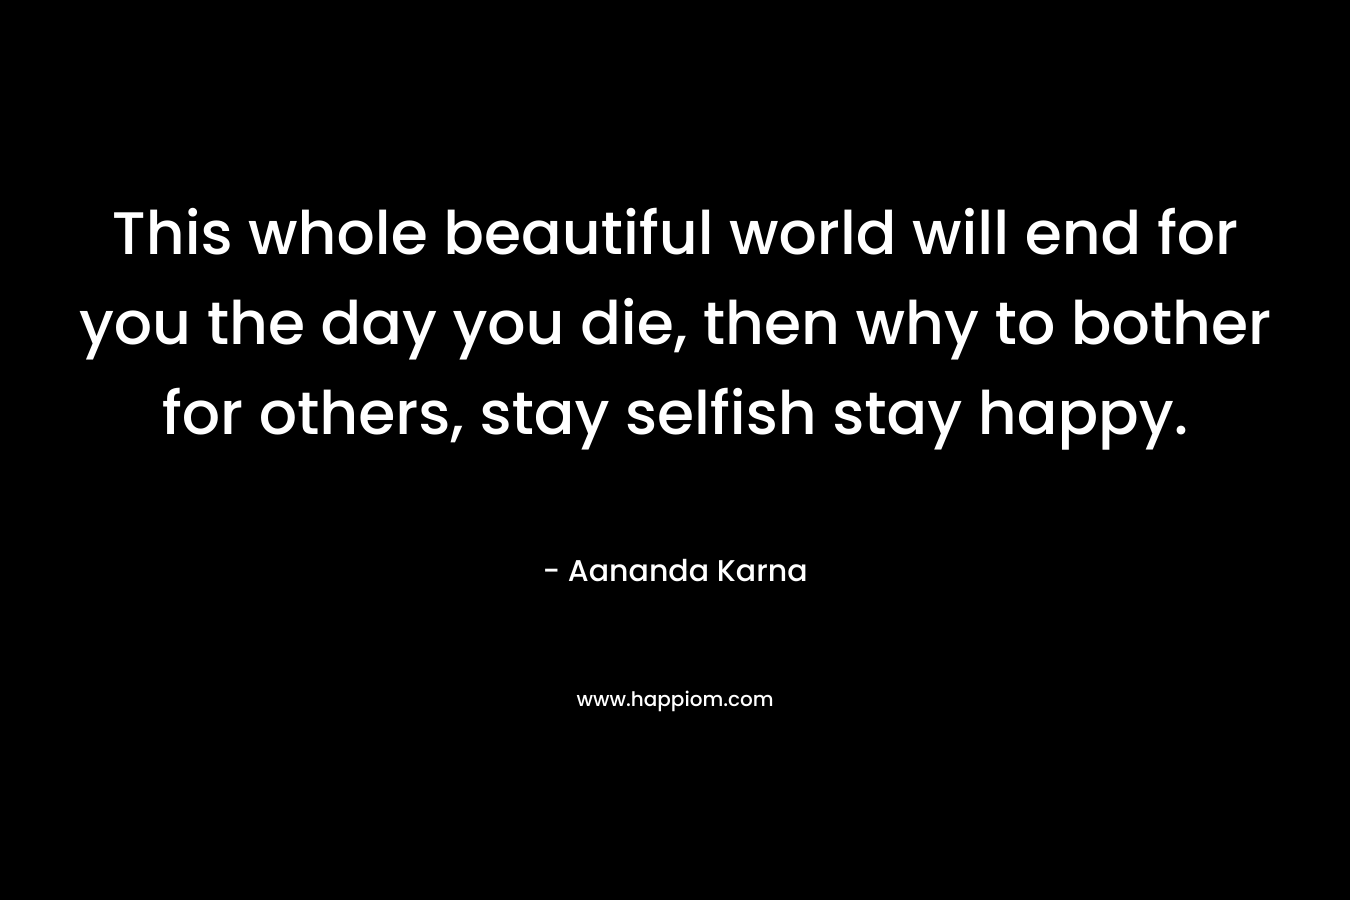 This whole beautiful world will end for you the day you die, then why to bother for others, stay selfish stay happy.